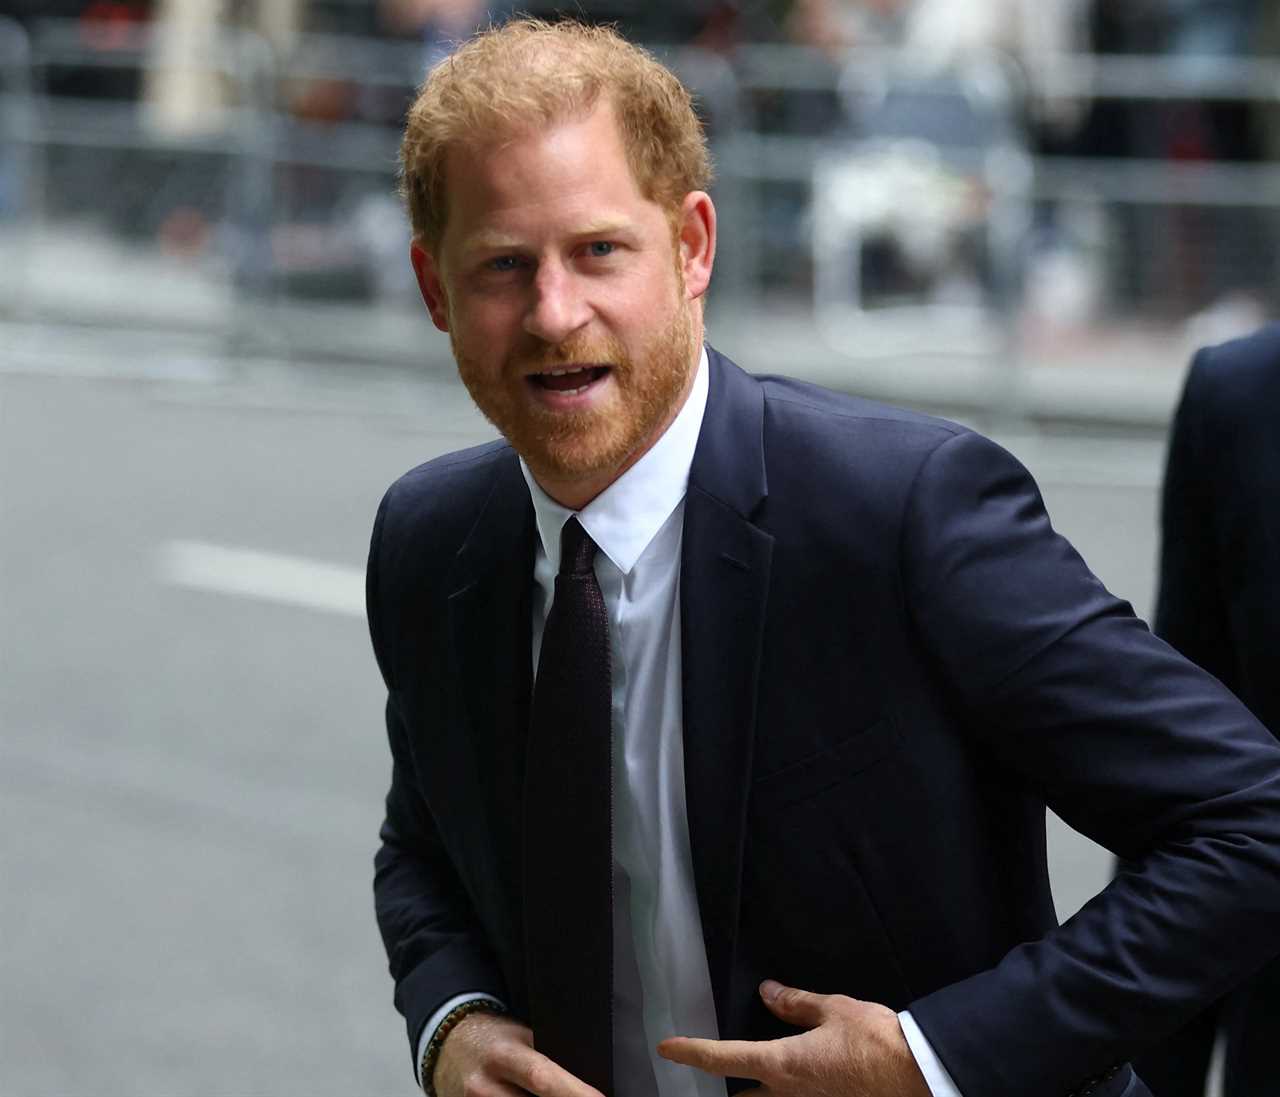 Prince Harry admits he made a ‘stupid decision’ by flirting with brunette at party while dating Chelsy Davy